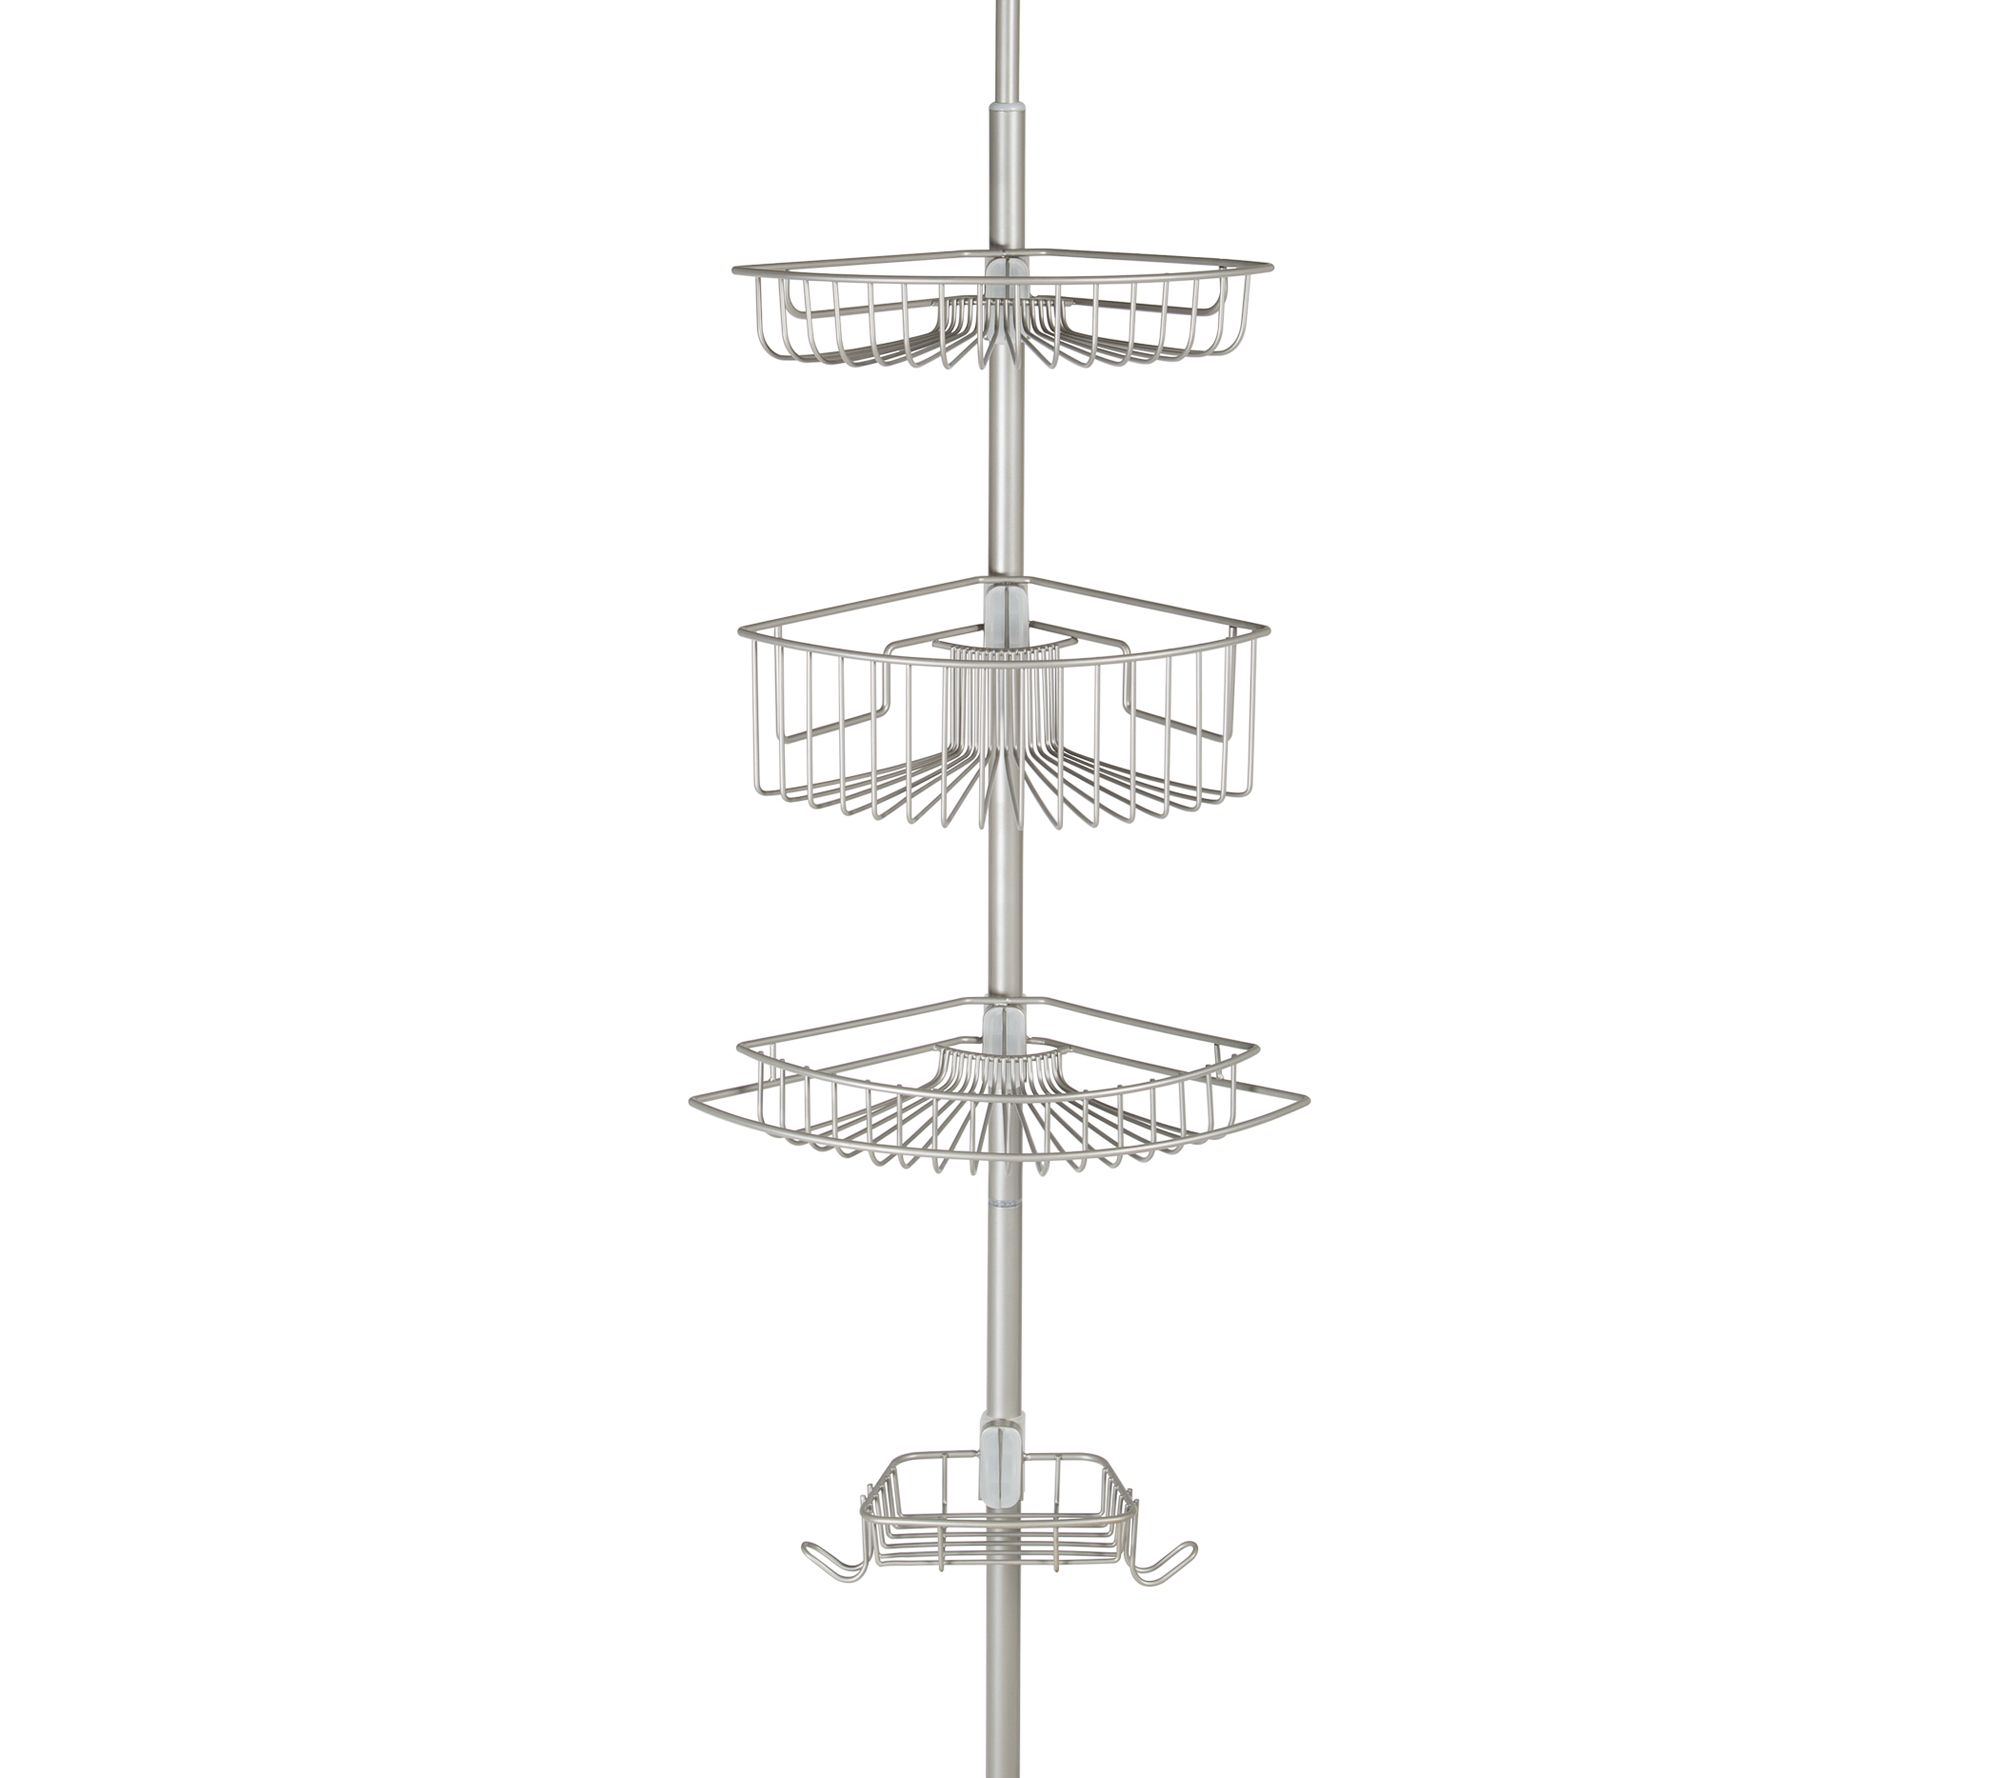 Zenna Home Tension Pole Shower Caddy with 4 Basket Shelves in White E2156WW  - The Home Depot